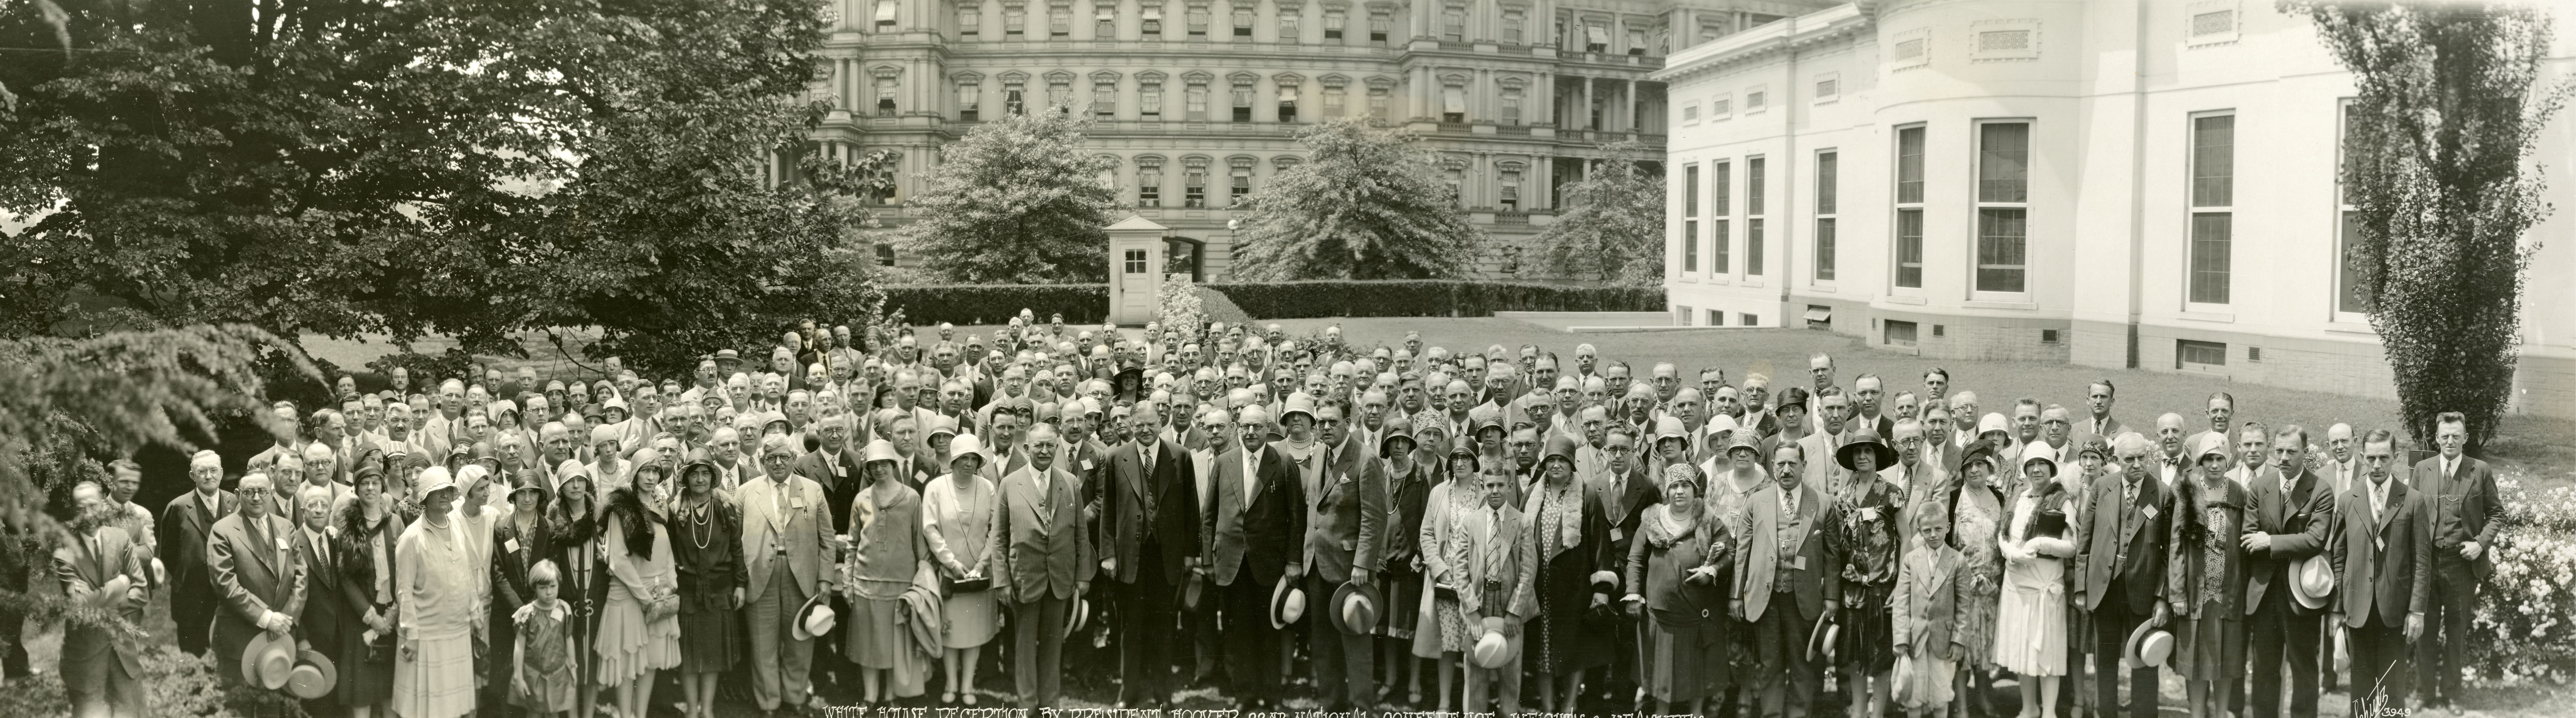 Group photograph of the White House Reception by President Hoover to the 22nd National Conference on Weights and Measures, Washington, DC. June 6, 1929.